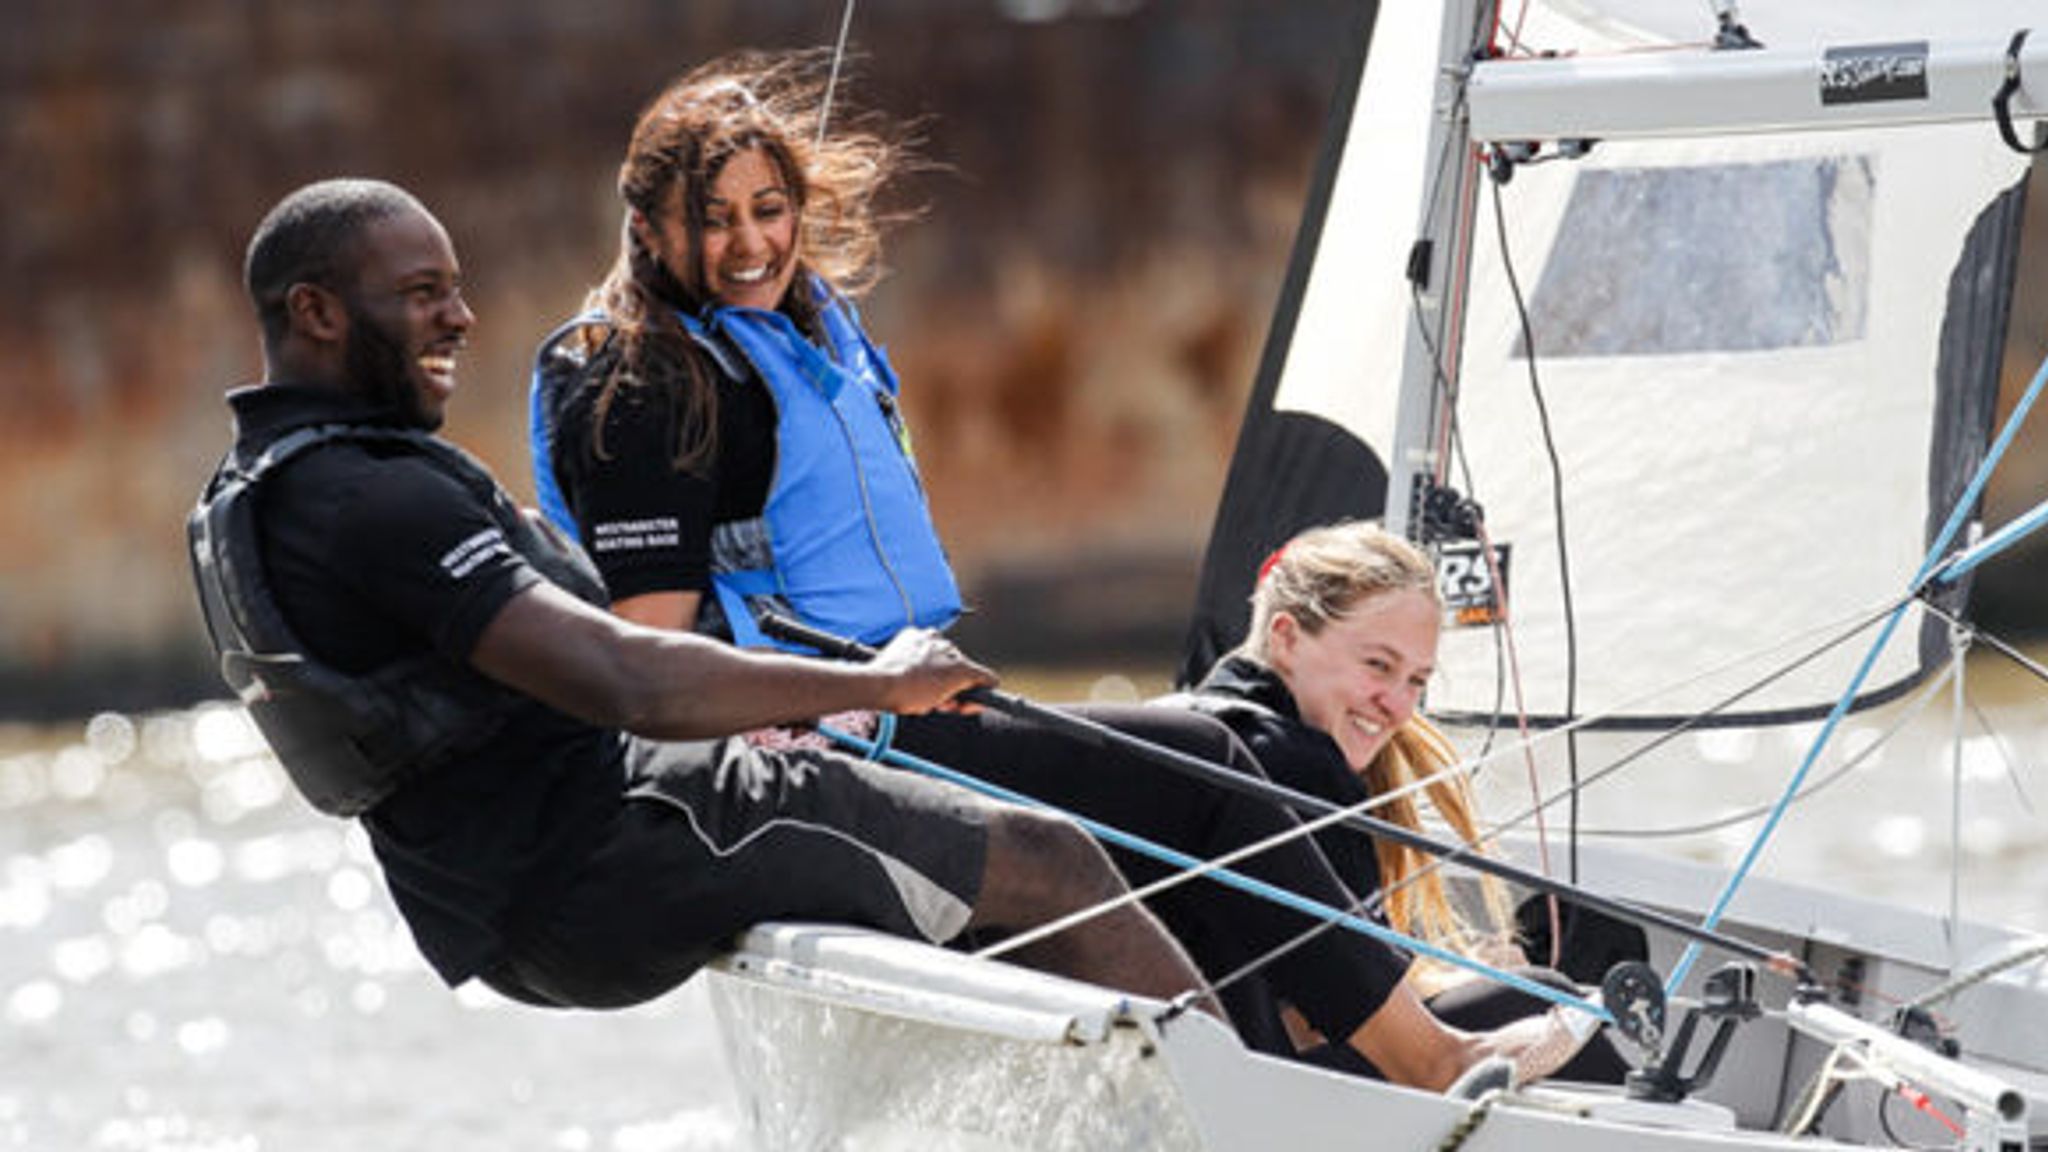 Royal Yachting Association sets new diversity strategy amid perception of being too white Sailing News Sky Sports